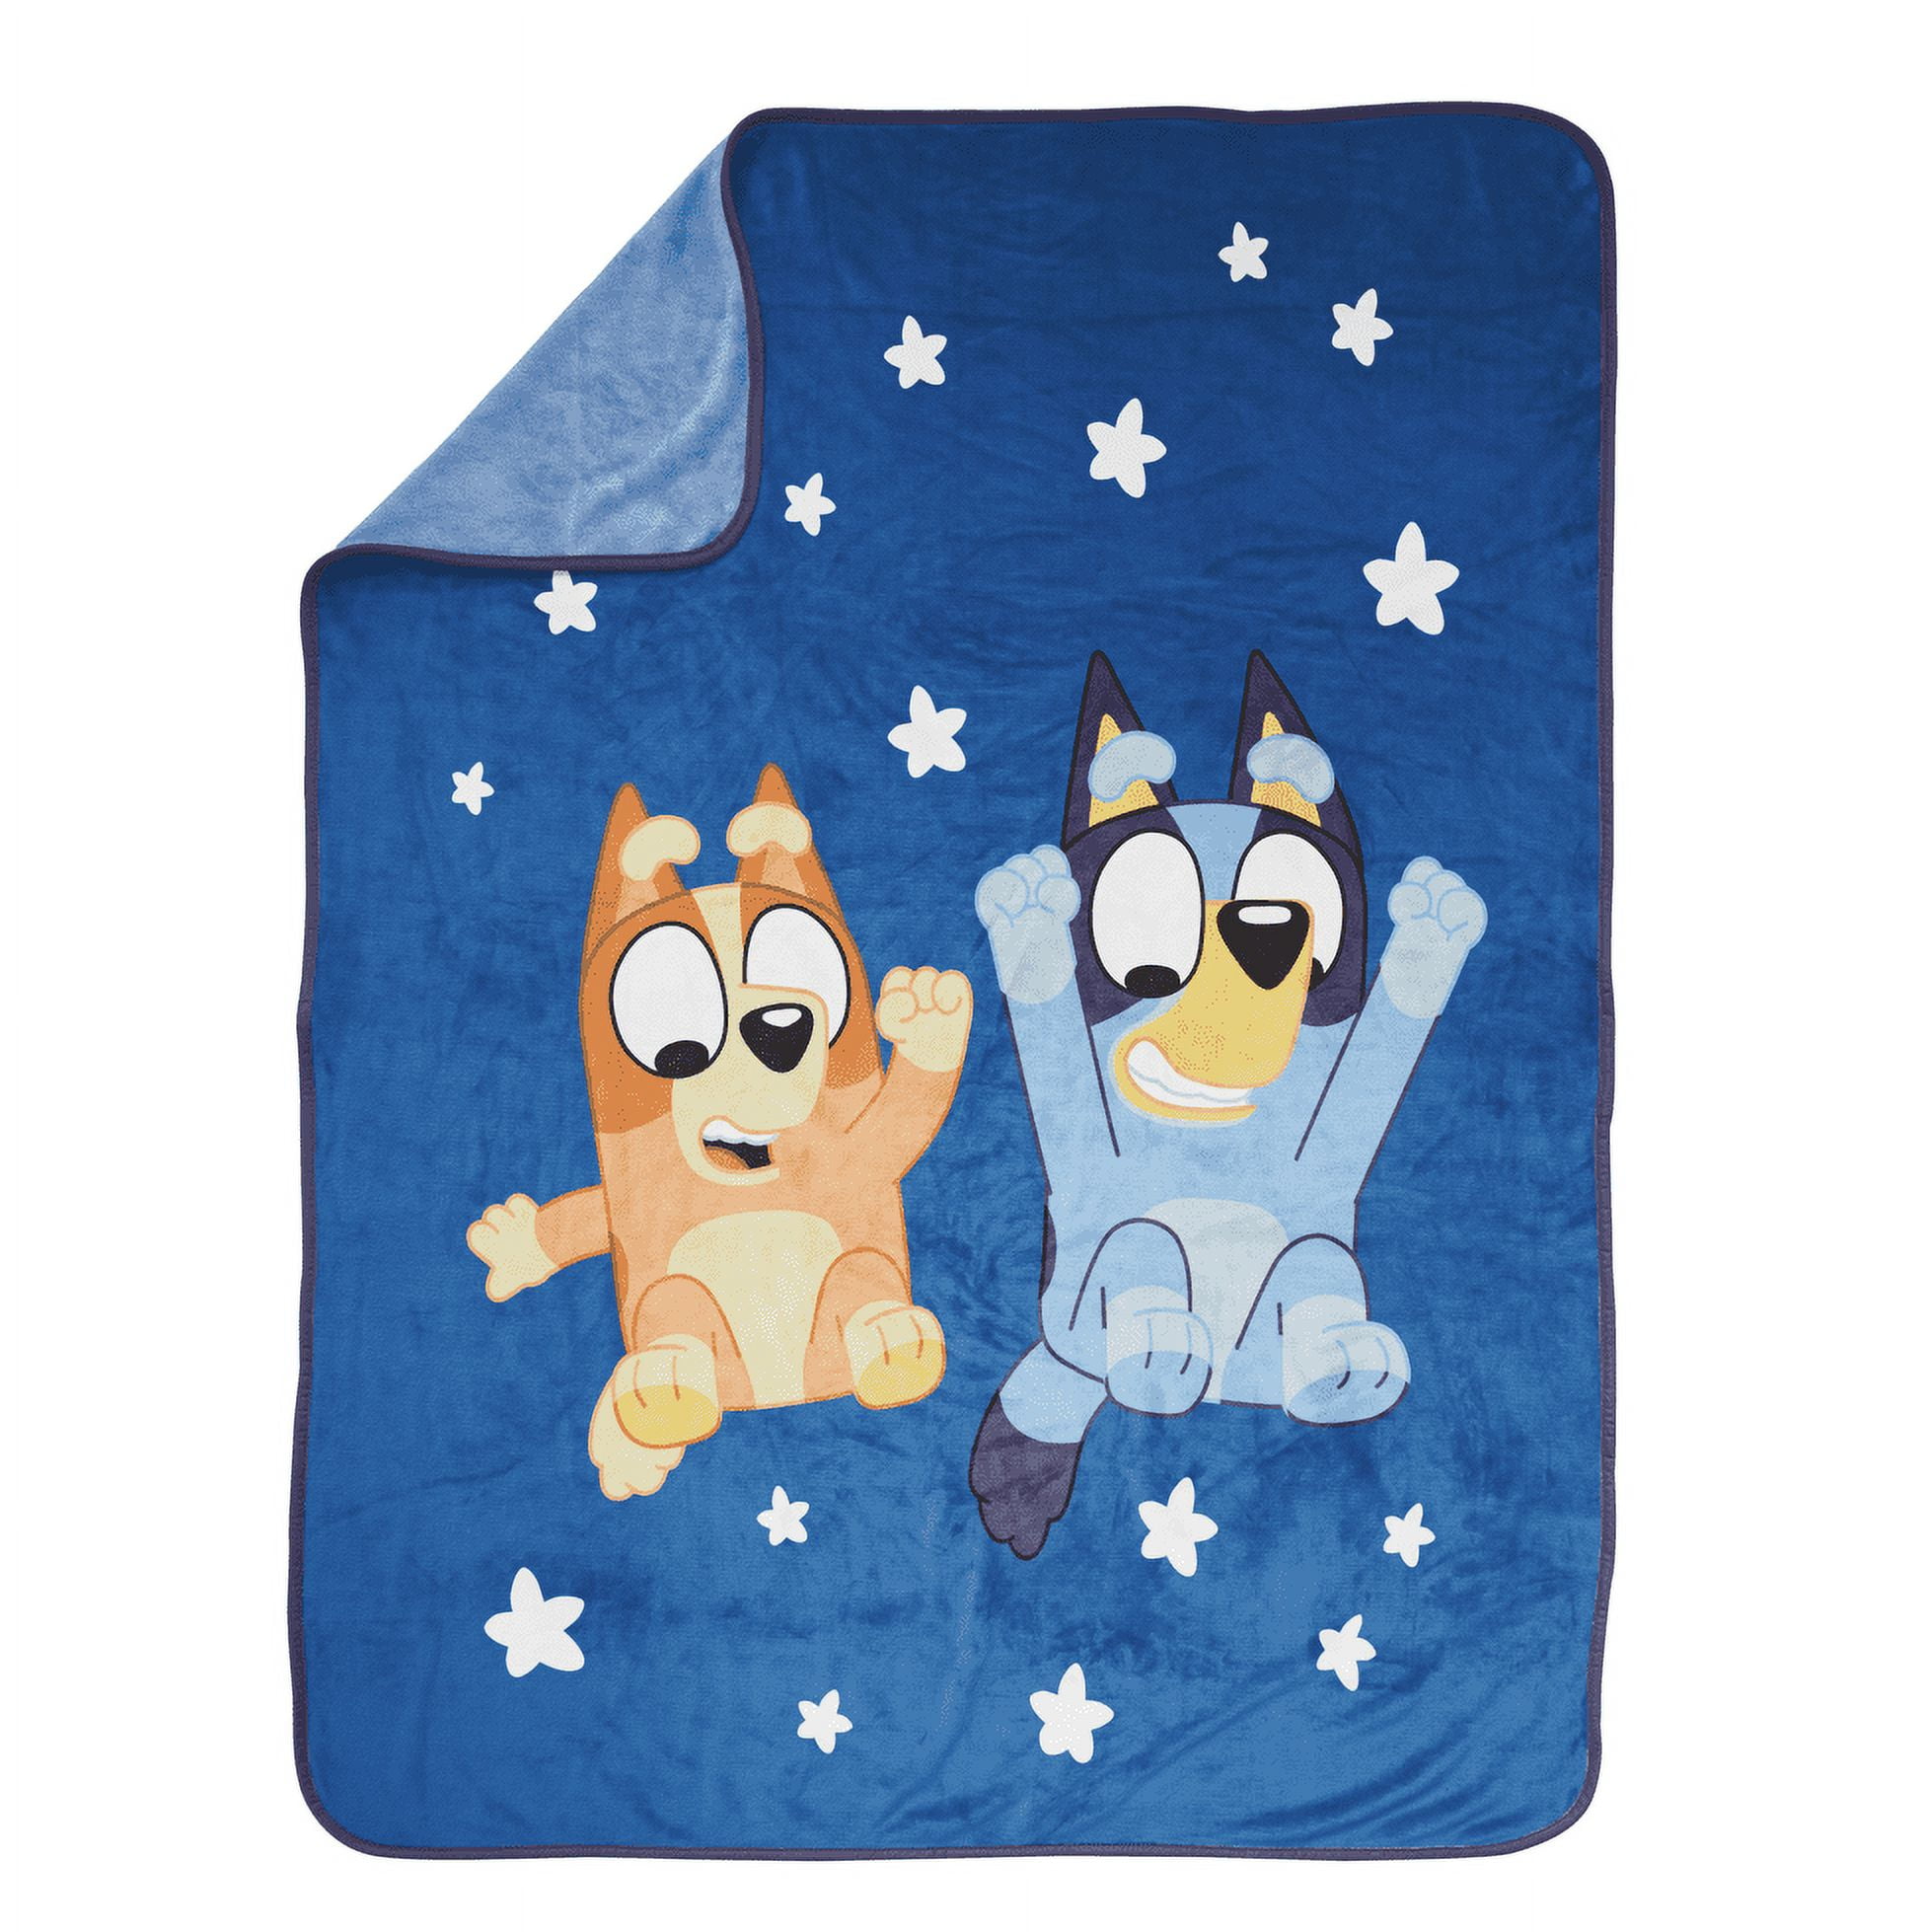 Bluey In The Dream Kids Throw ONLY $12.97 (Reg $32.65)